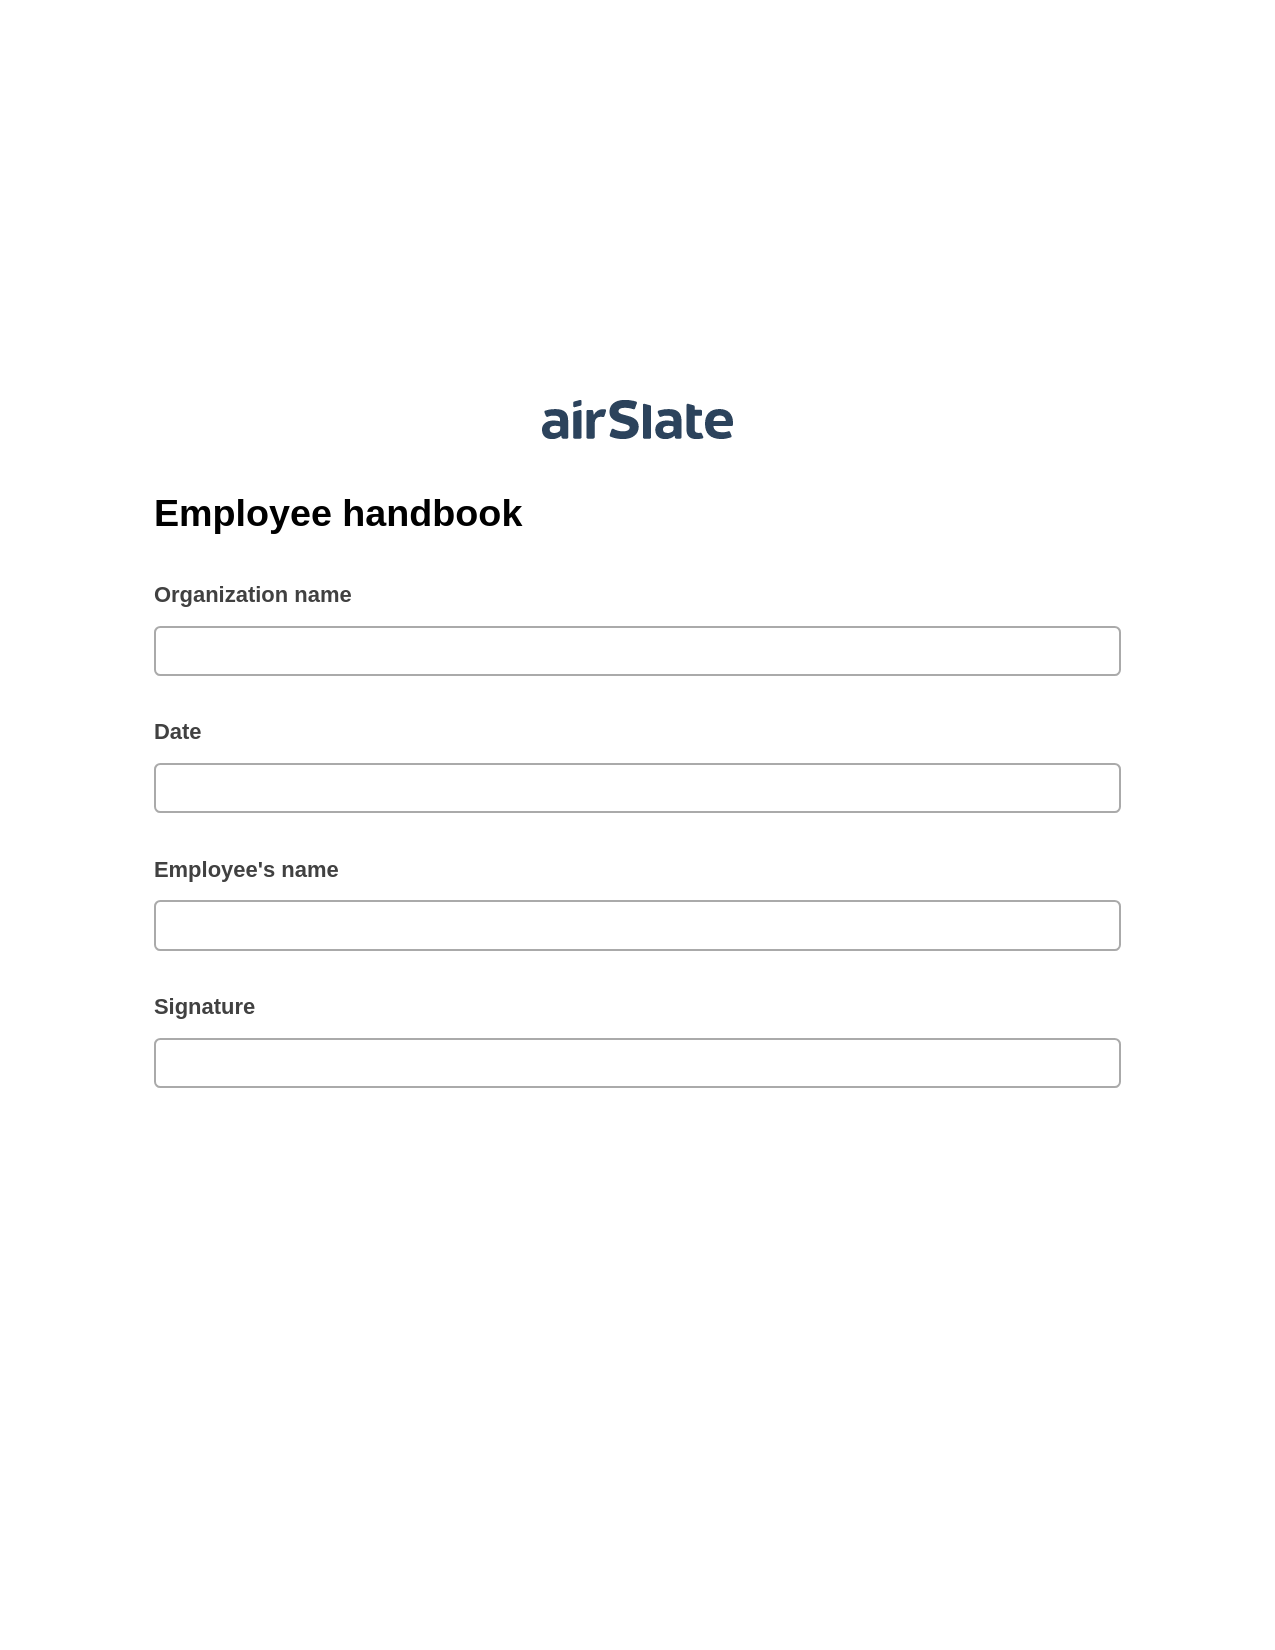 Employee handbook Pre-fill Slate from MS Dynamics 365 Records Bot, Open as Role Bot, Export to Google Sheet Bot